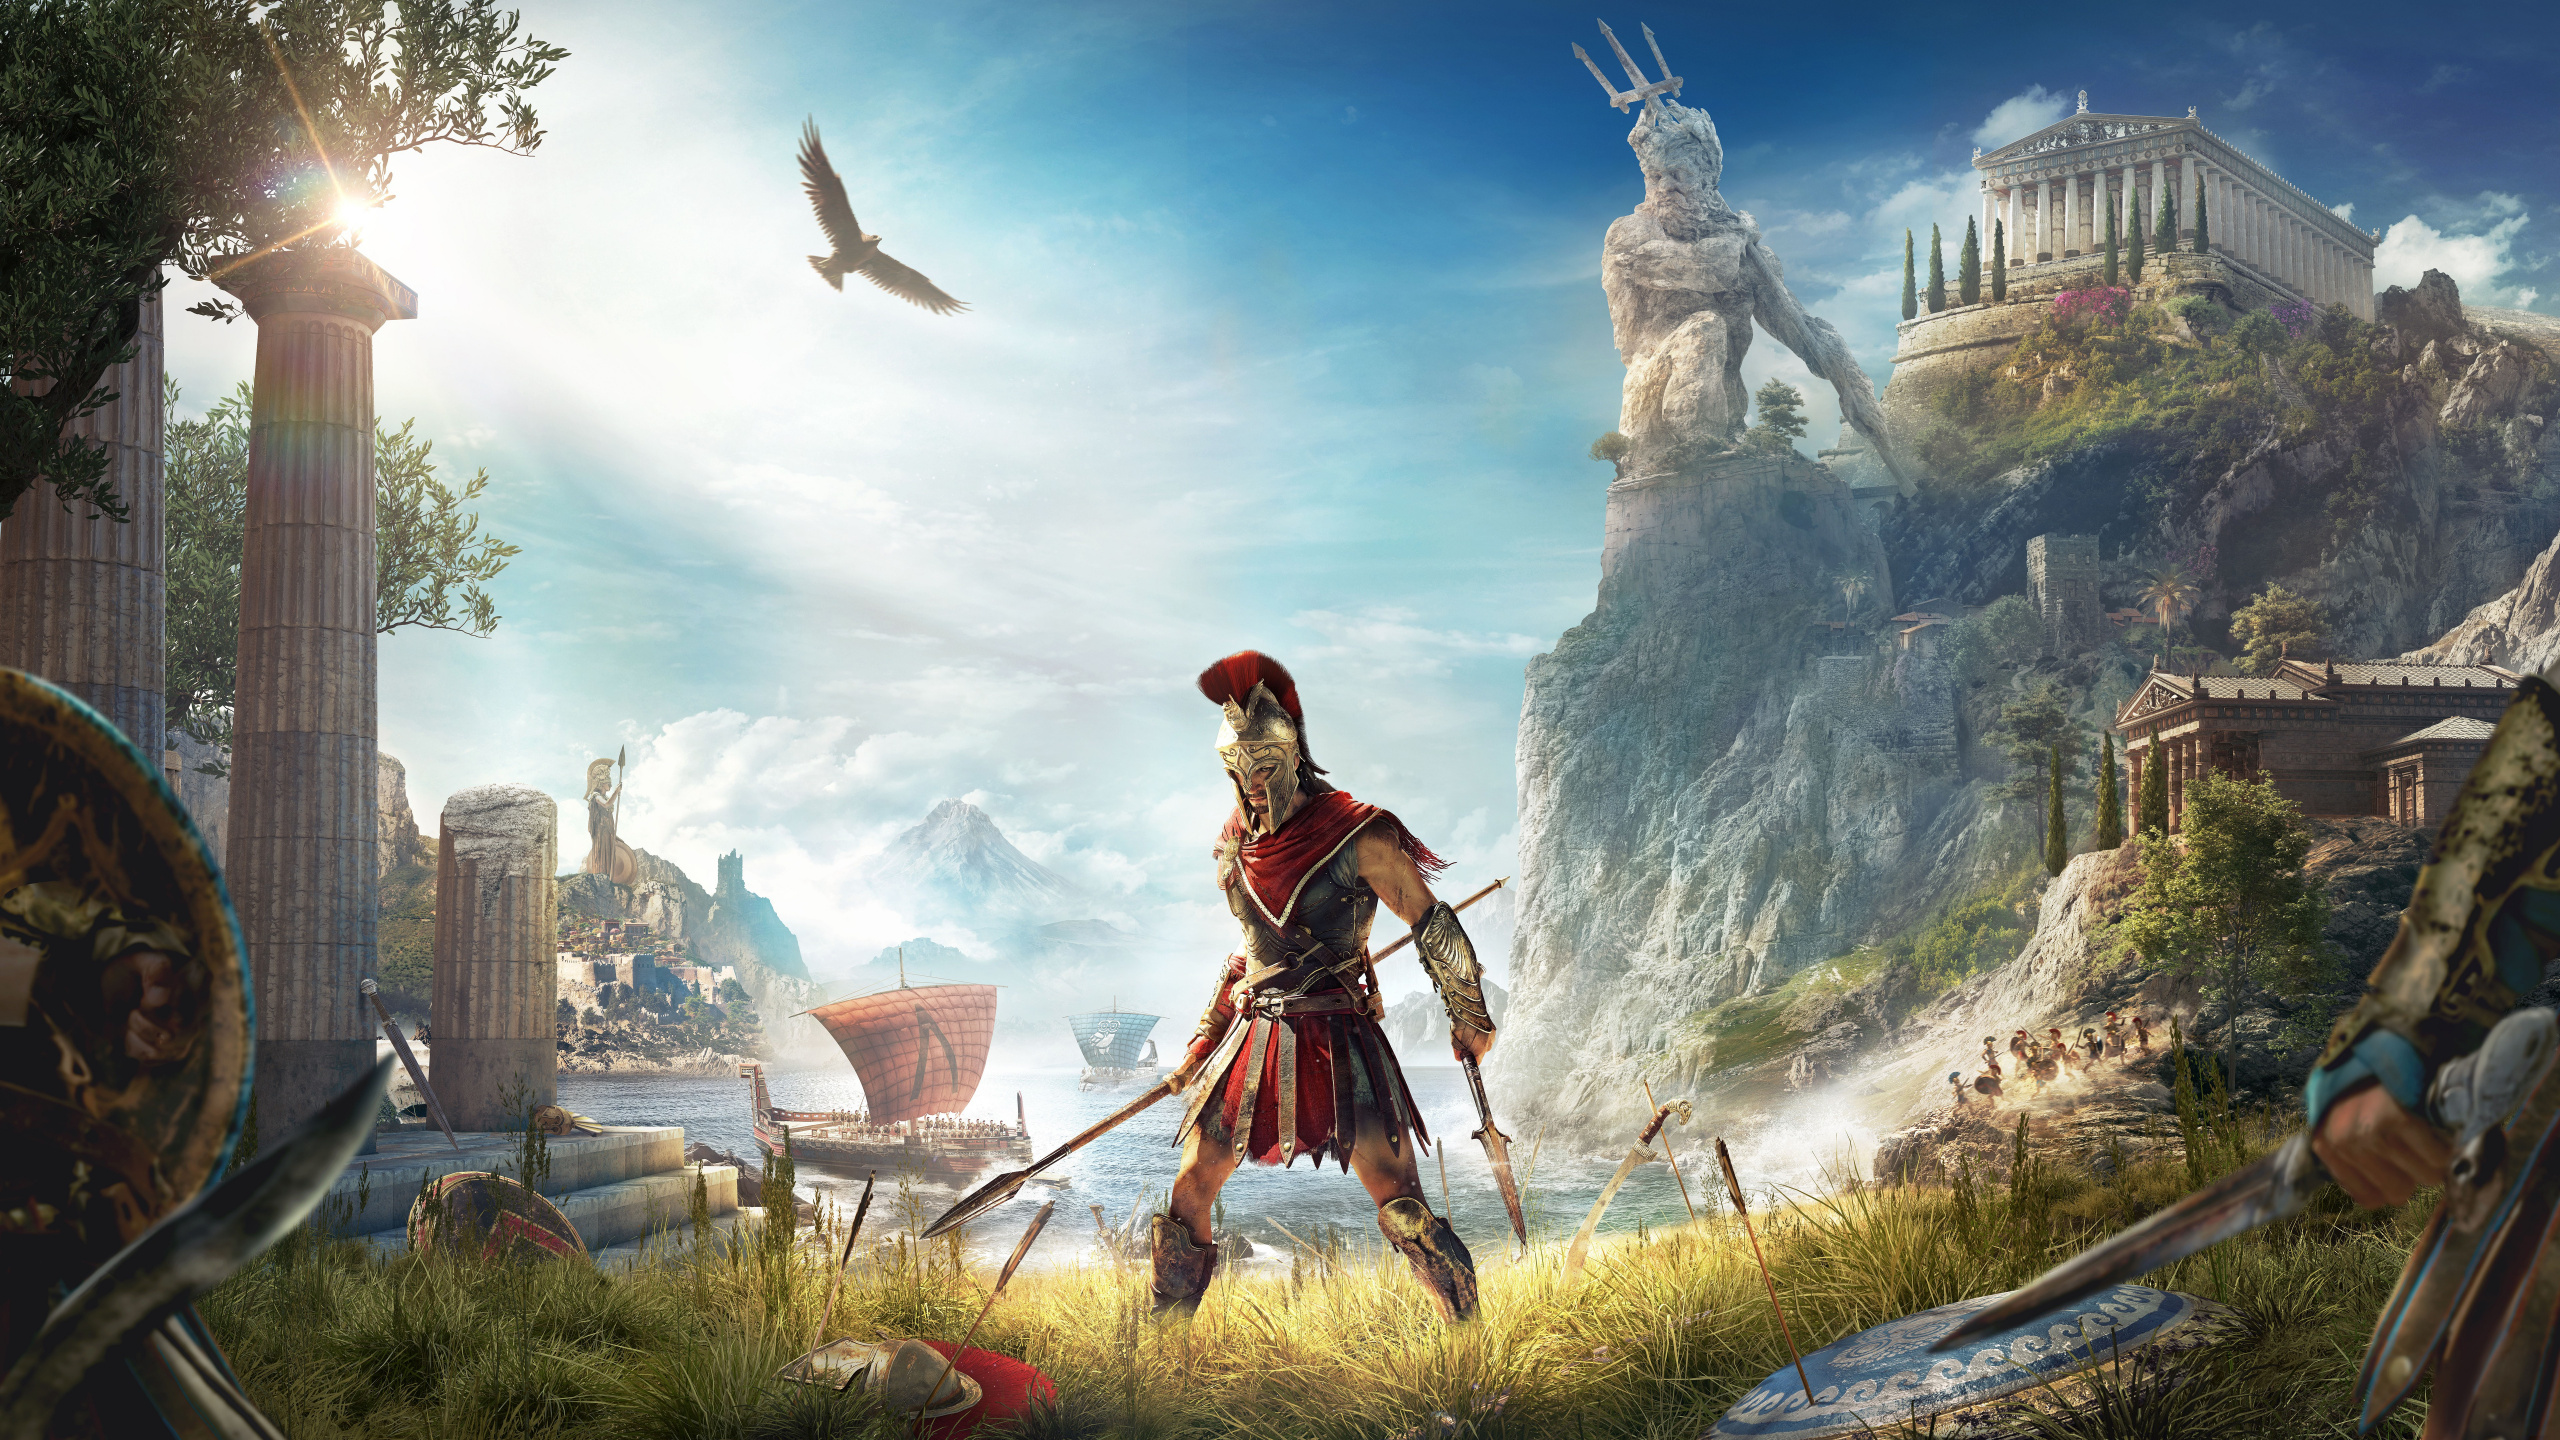 Assassins Creed Odyssey, Ubisoft, pc Game, Games, Mythology. Wallpaper in 2560x1440 Resolution